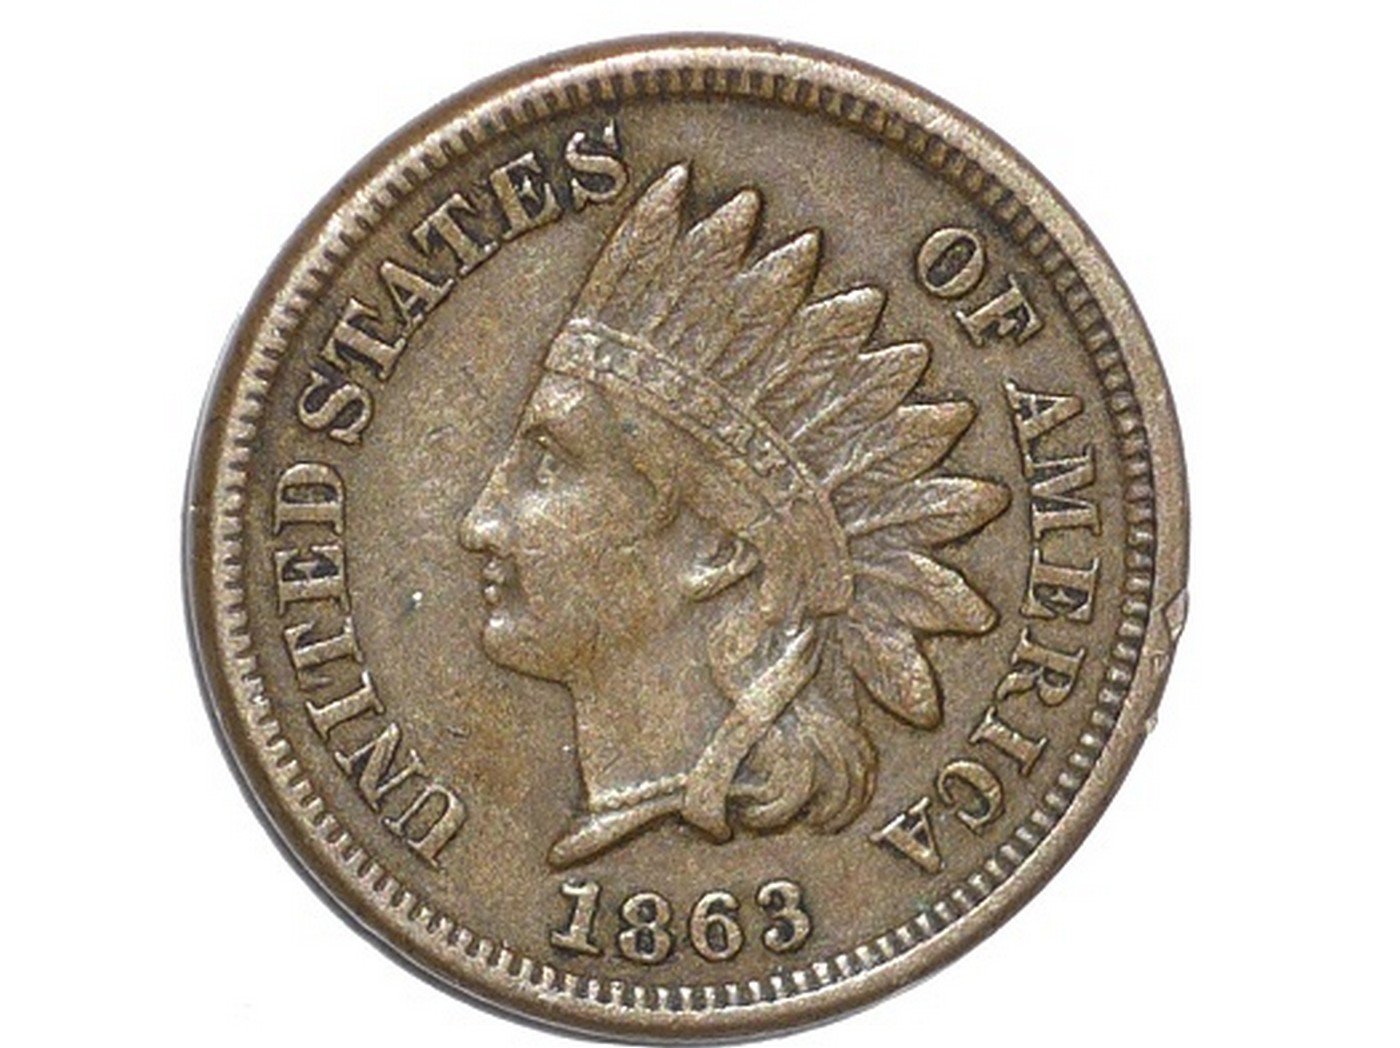 1863 Obverse of CRK-003 - Indian Head Penny - Photo by David Poliquin